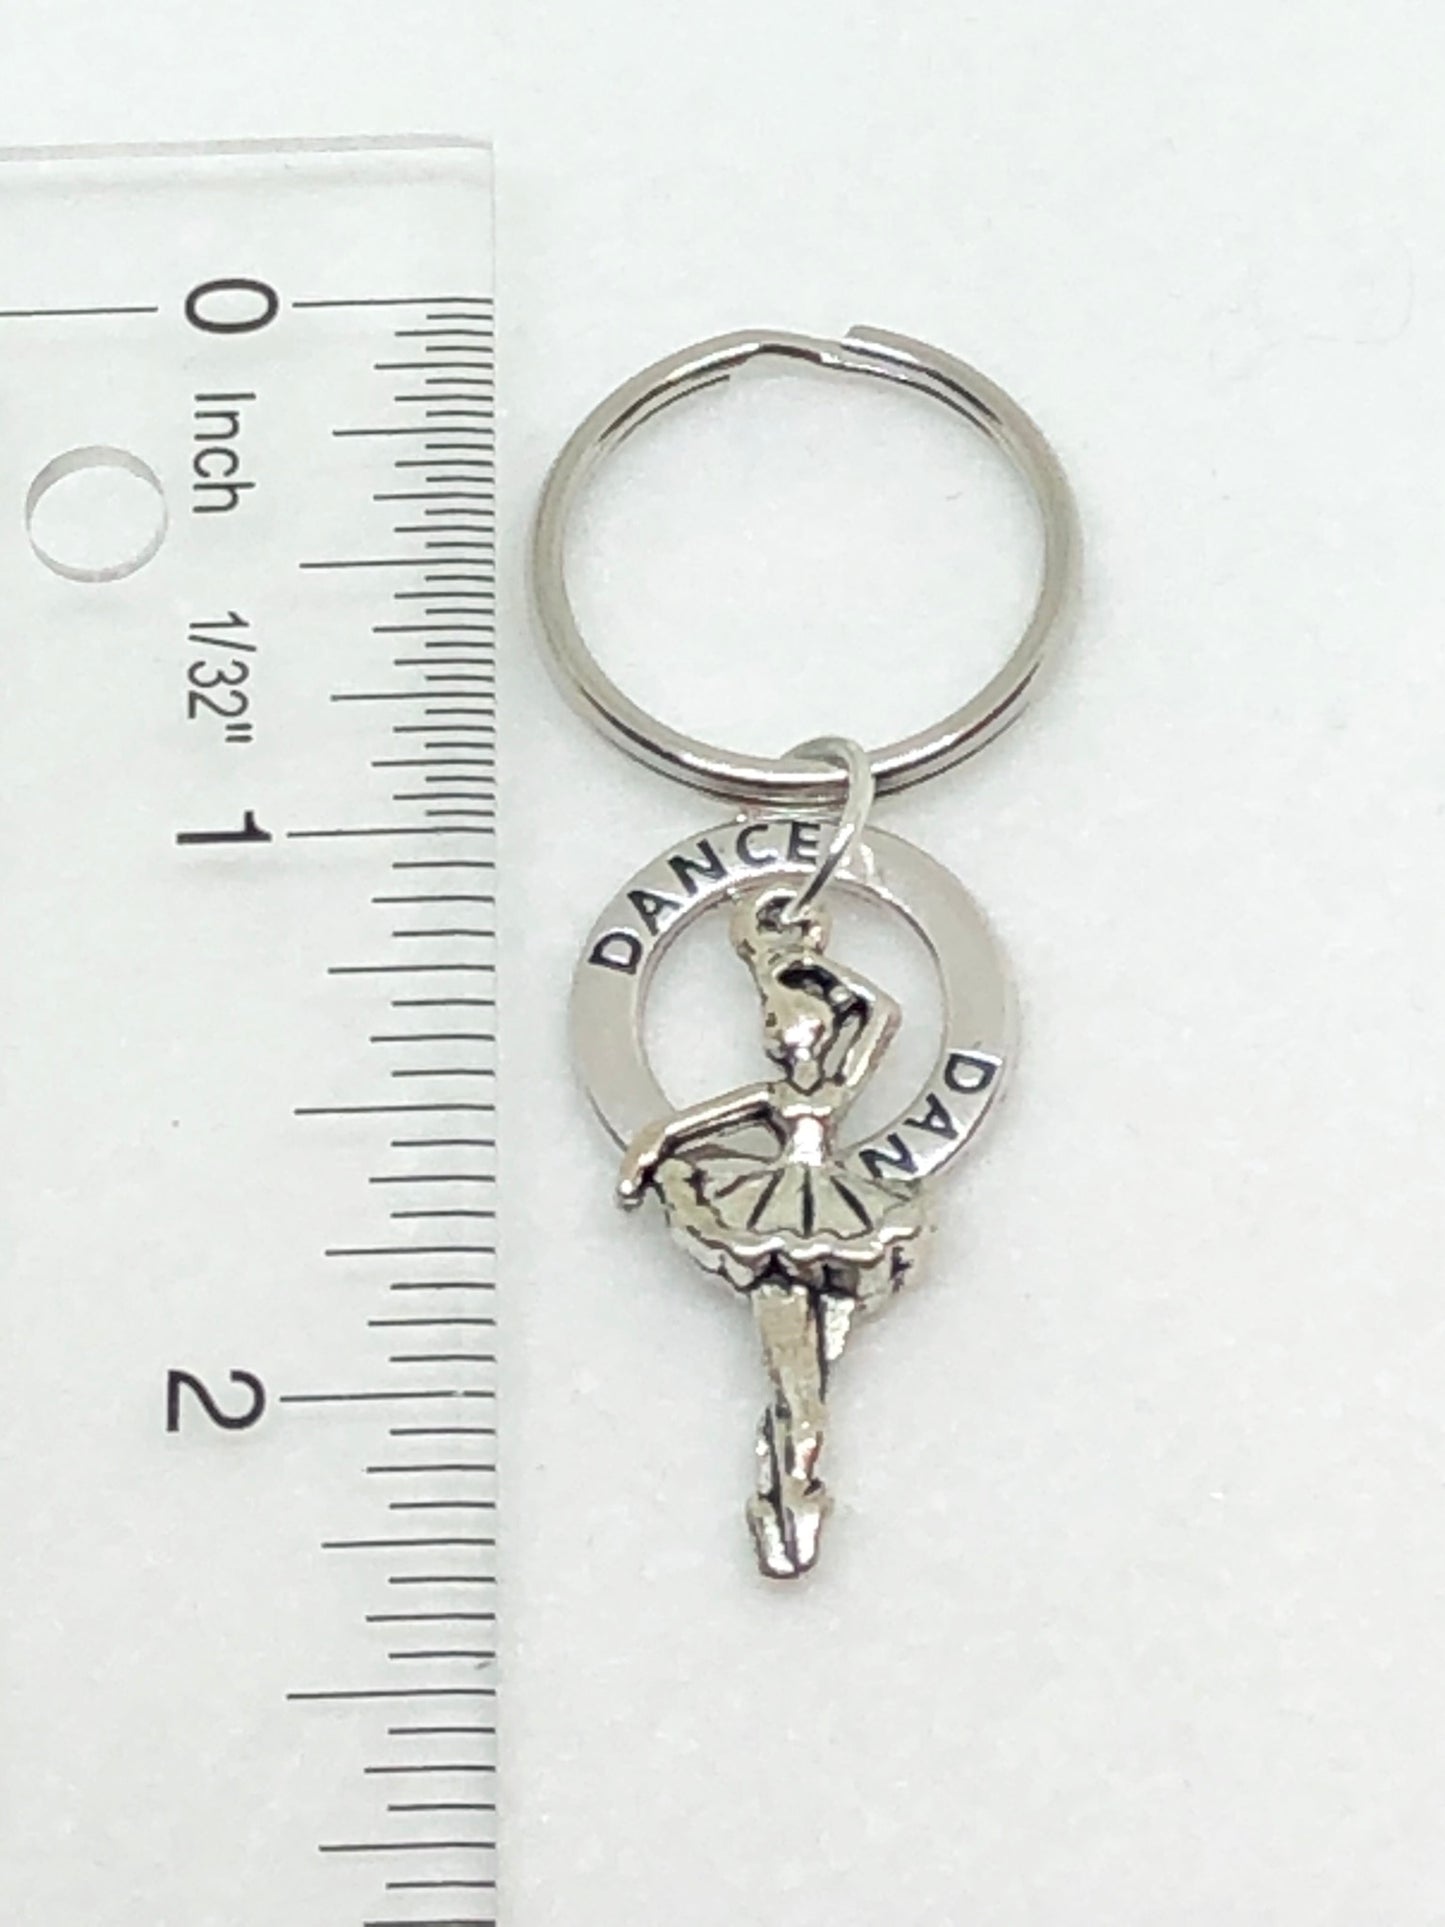 Create Your Own Dance Charm Key Chain, Cheerleading Accessories - Cheer and Dance On Demand